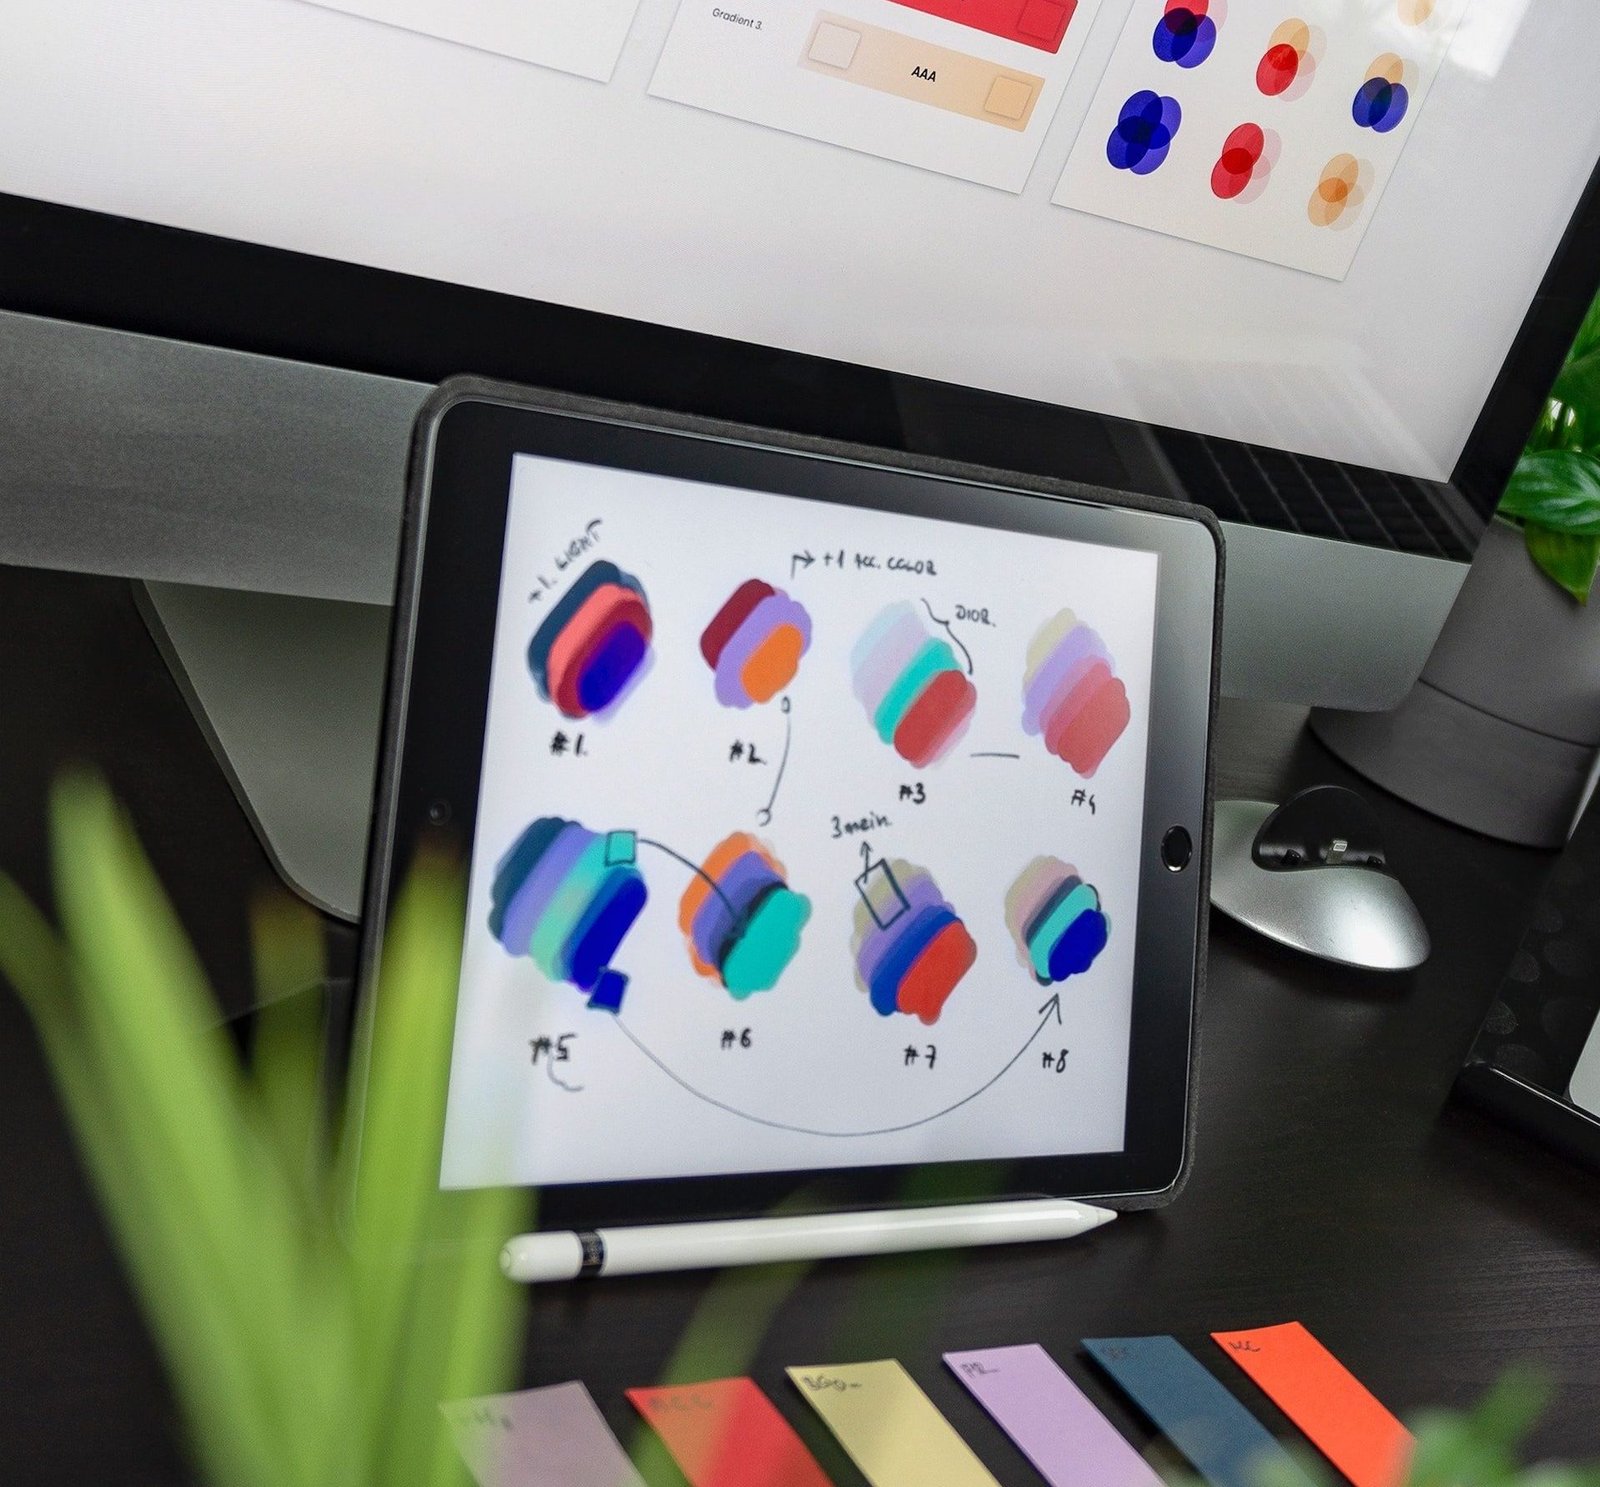 Viewing various color scheme options on a tablet